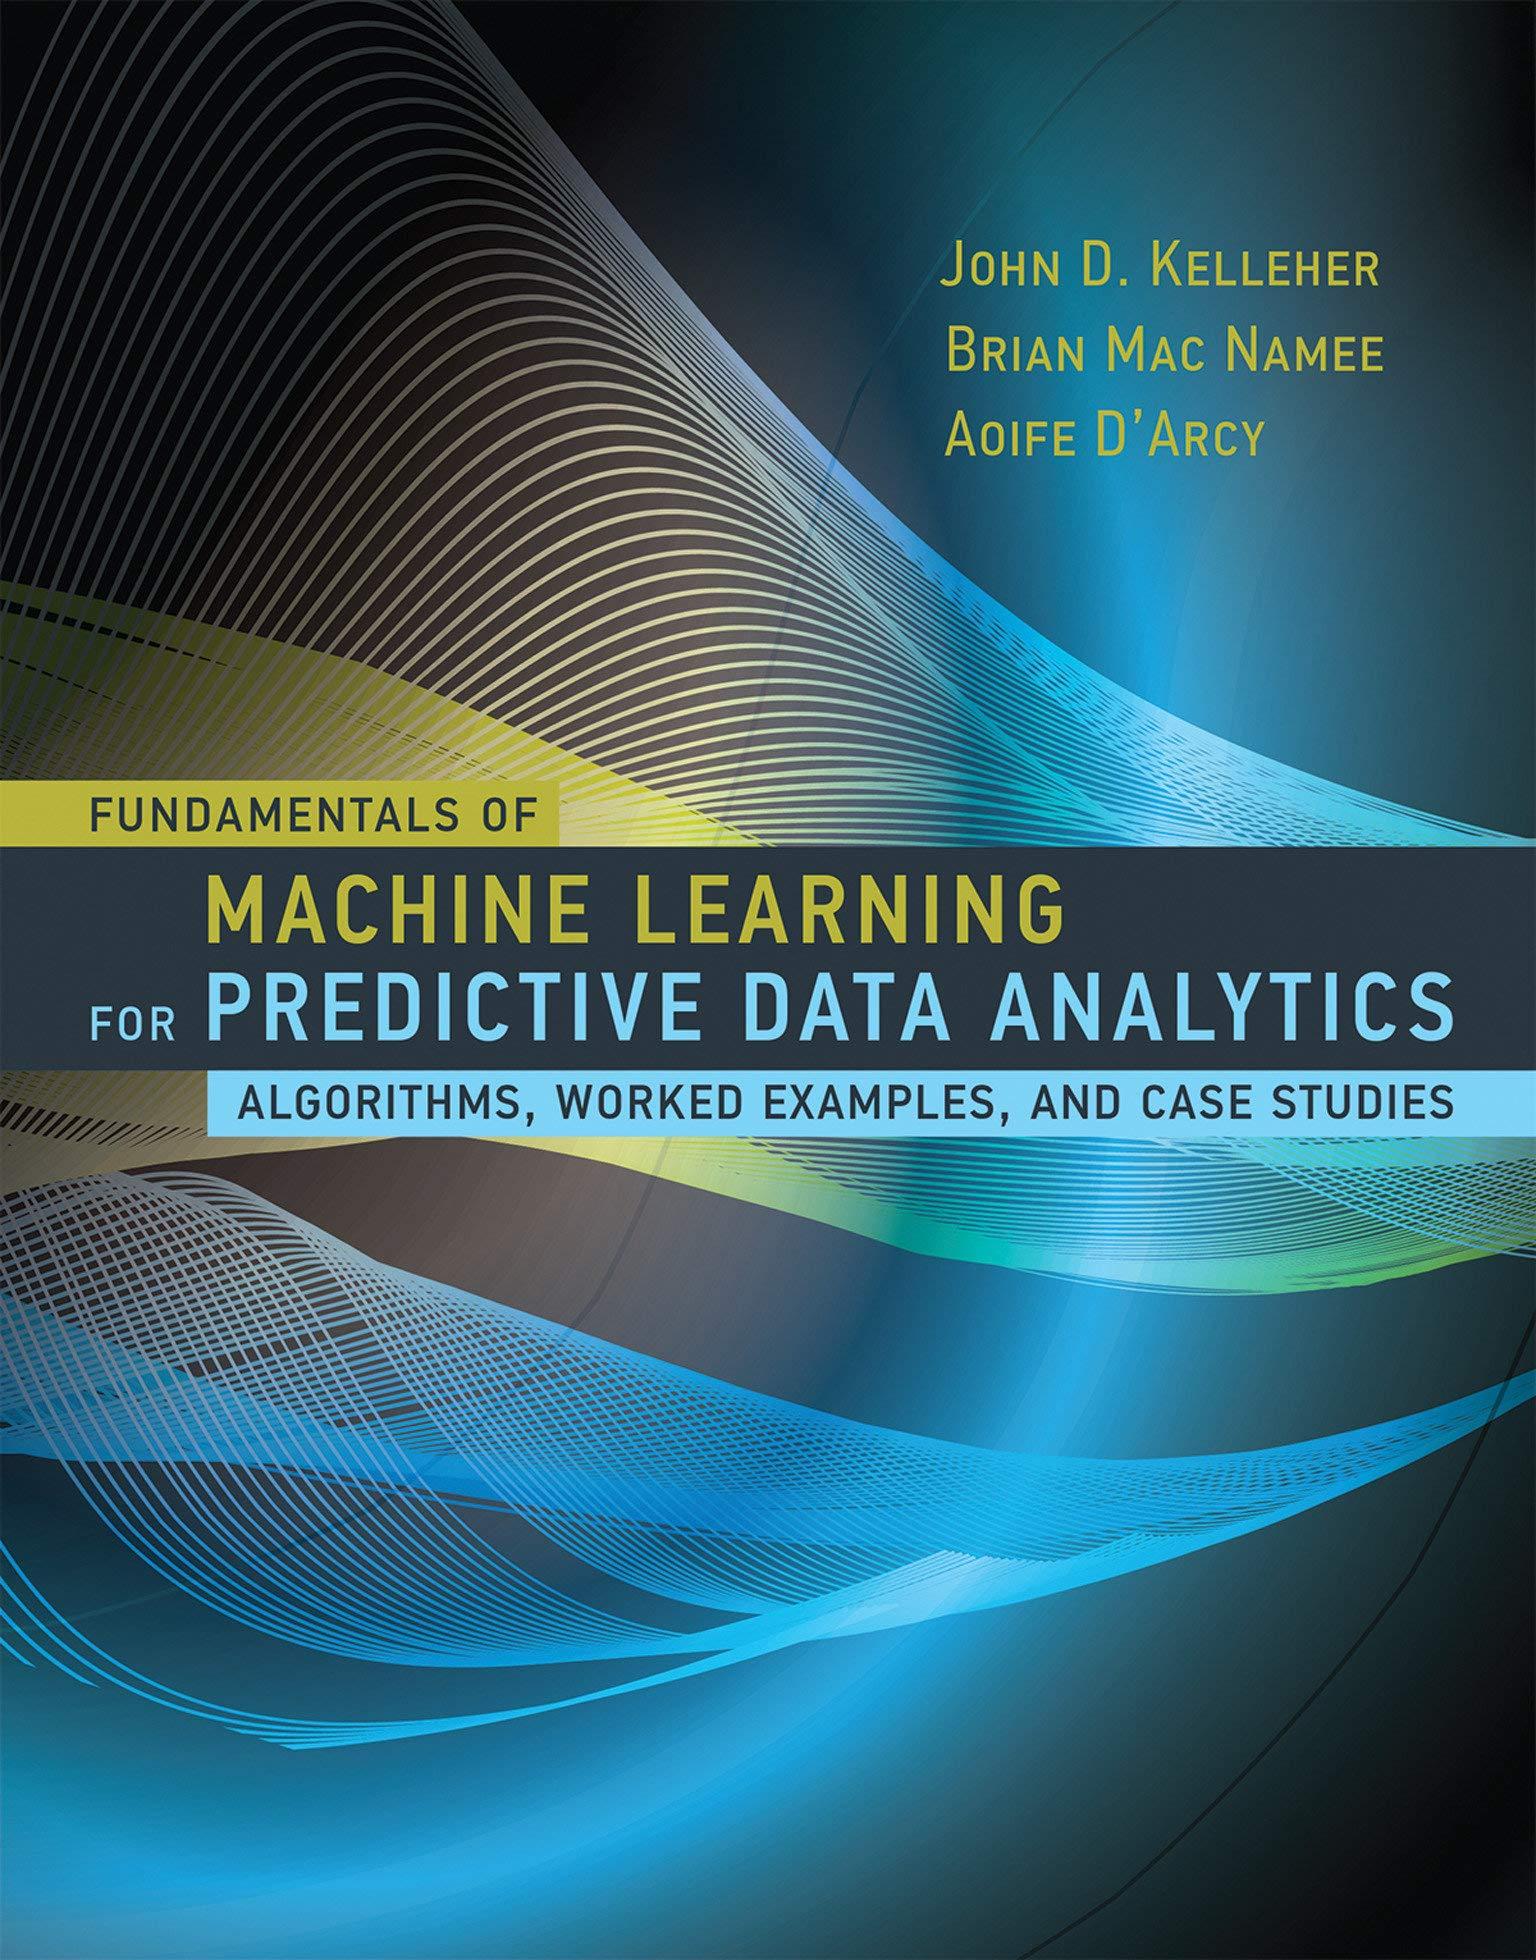 fundamentals of machine learning for predictive data analytics algorithms worked examples and case studies